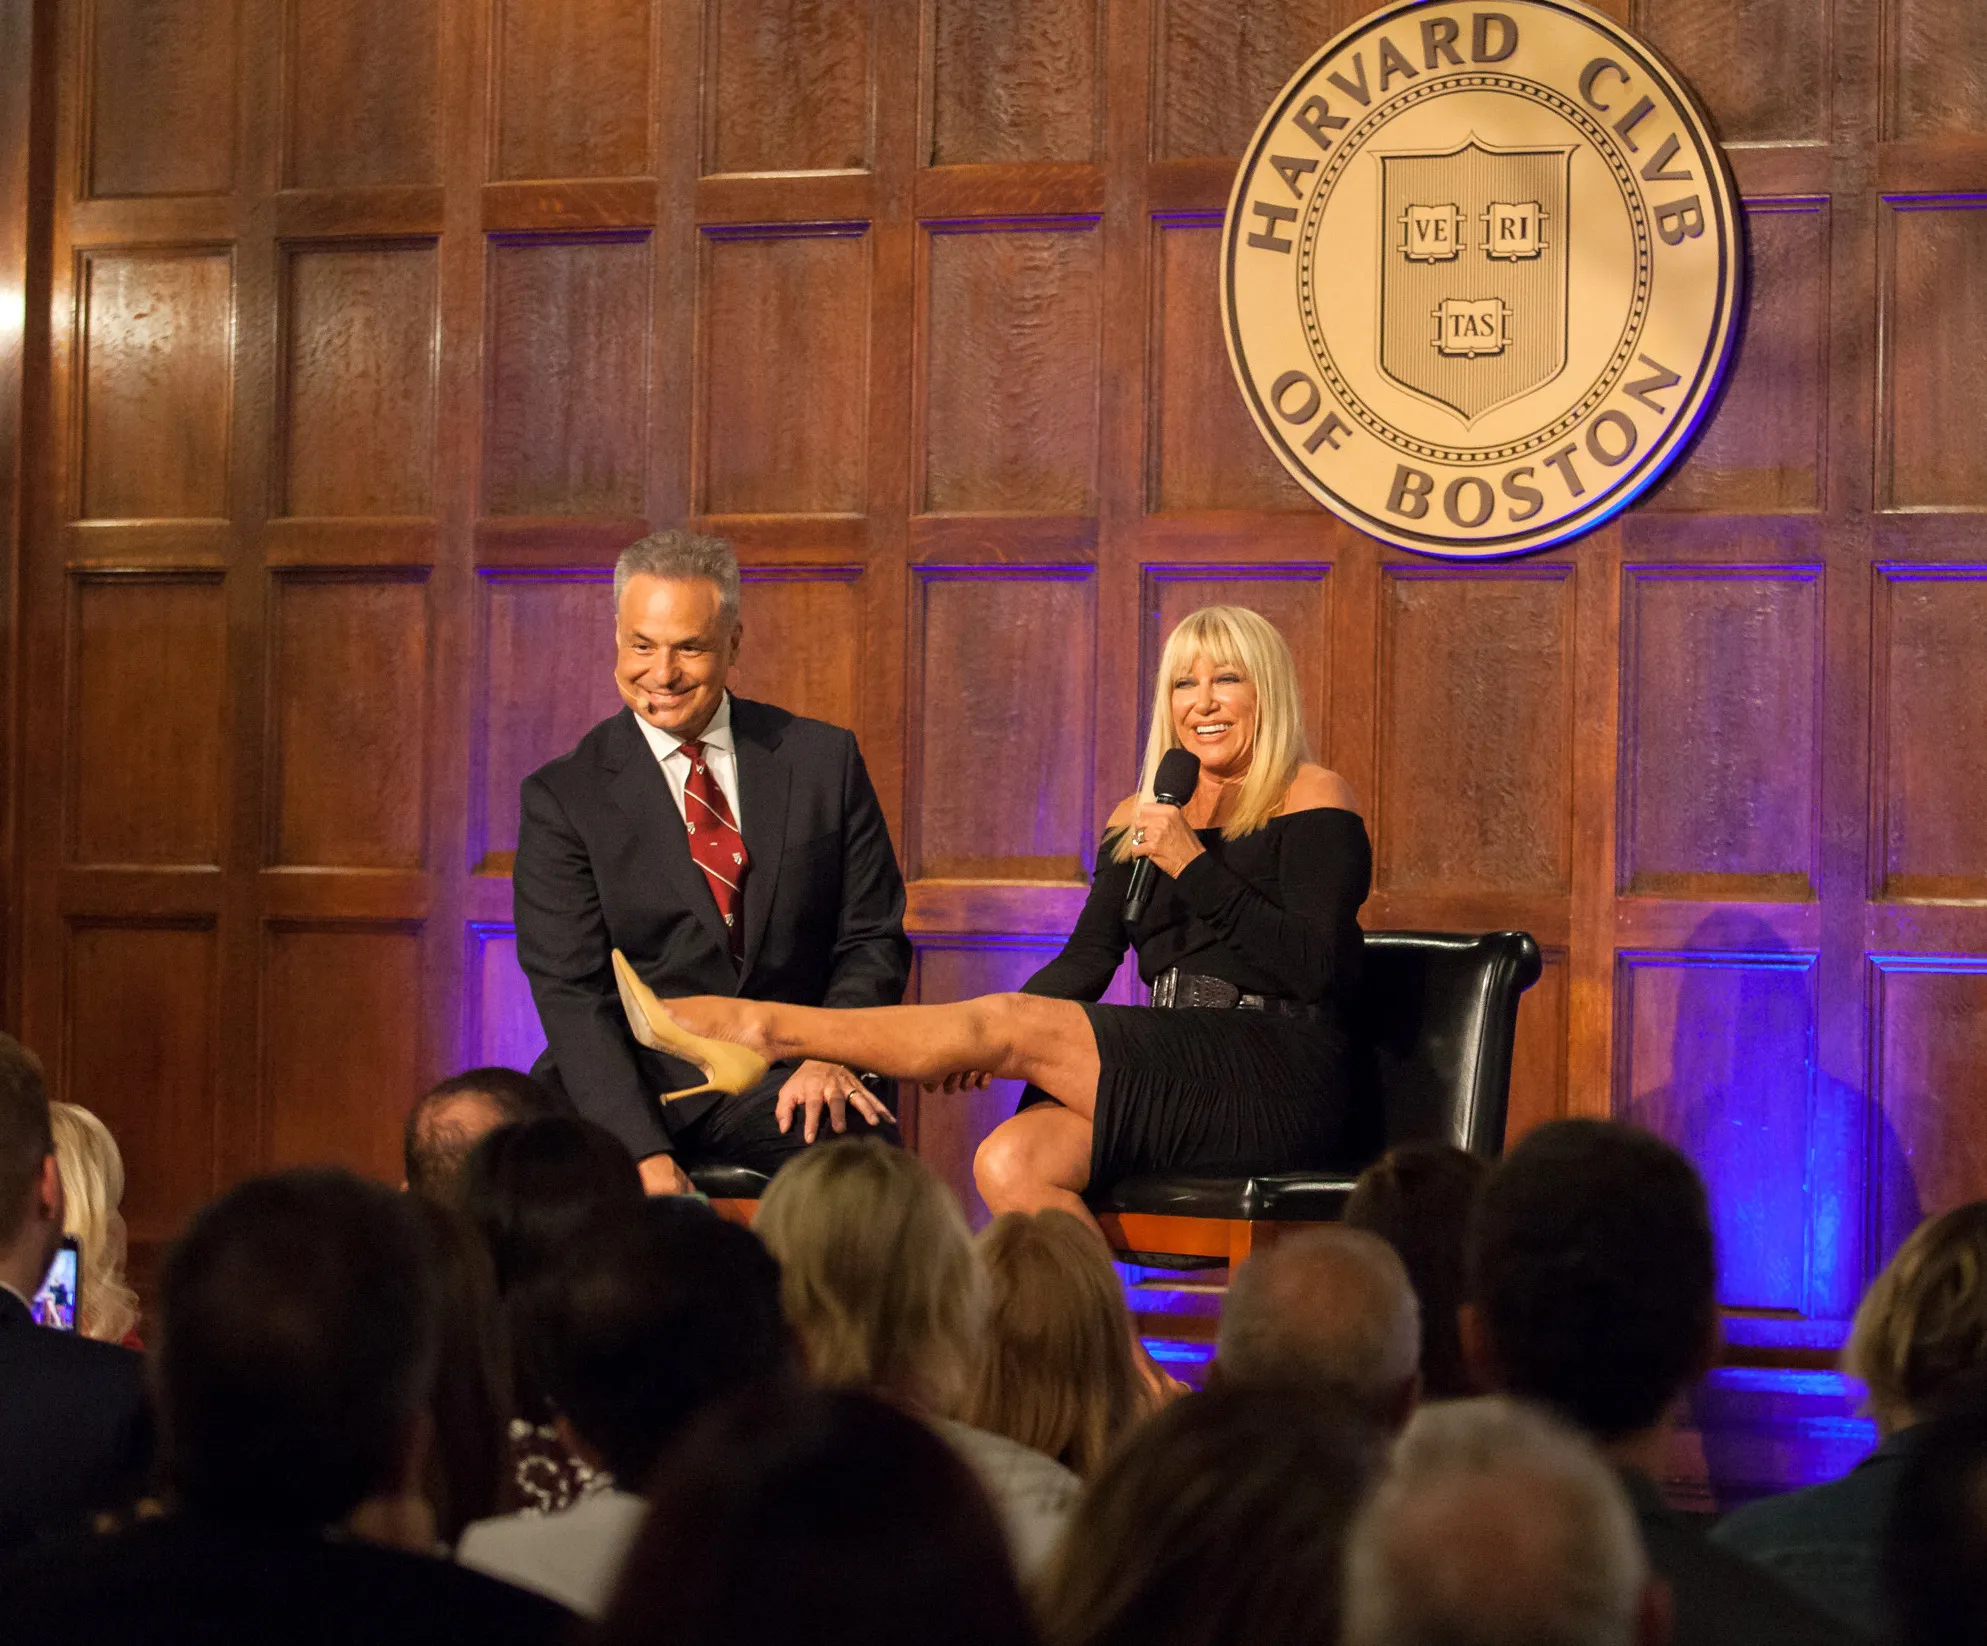 Clint Arthur & Suzanne Somers at Harvard Club of Boston